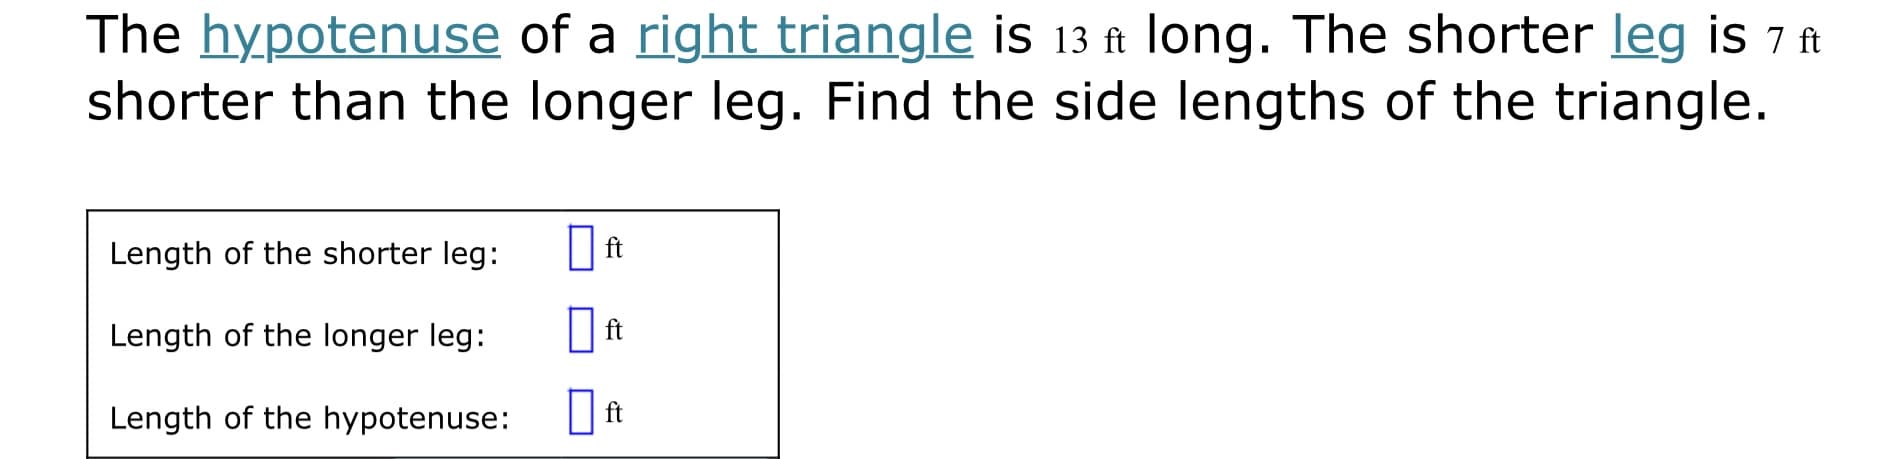 The hypotenuse of a right triangle is 13 ft long. The shorter leg is 7 ft
shorter than the longer leg. Find the side lengths of the triangle.
Length of the shorter leg:
ft
Length of the longer leg:
Length of the hypotenuse:
